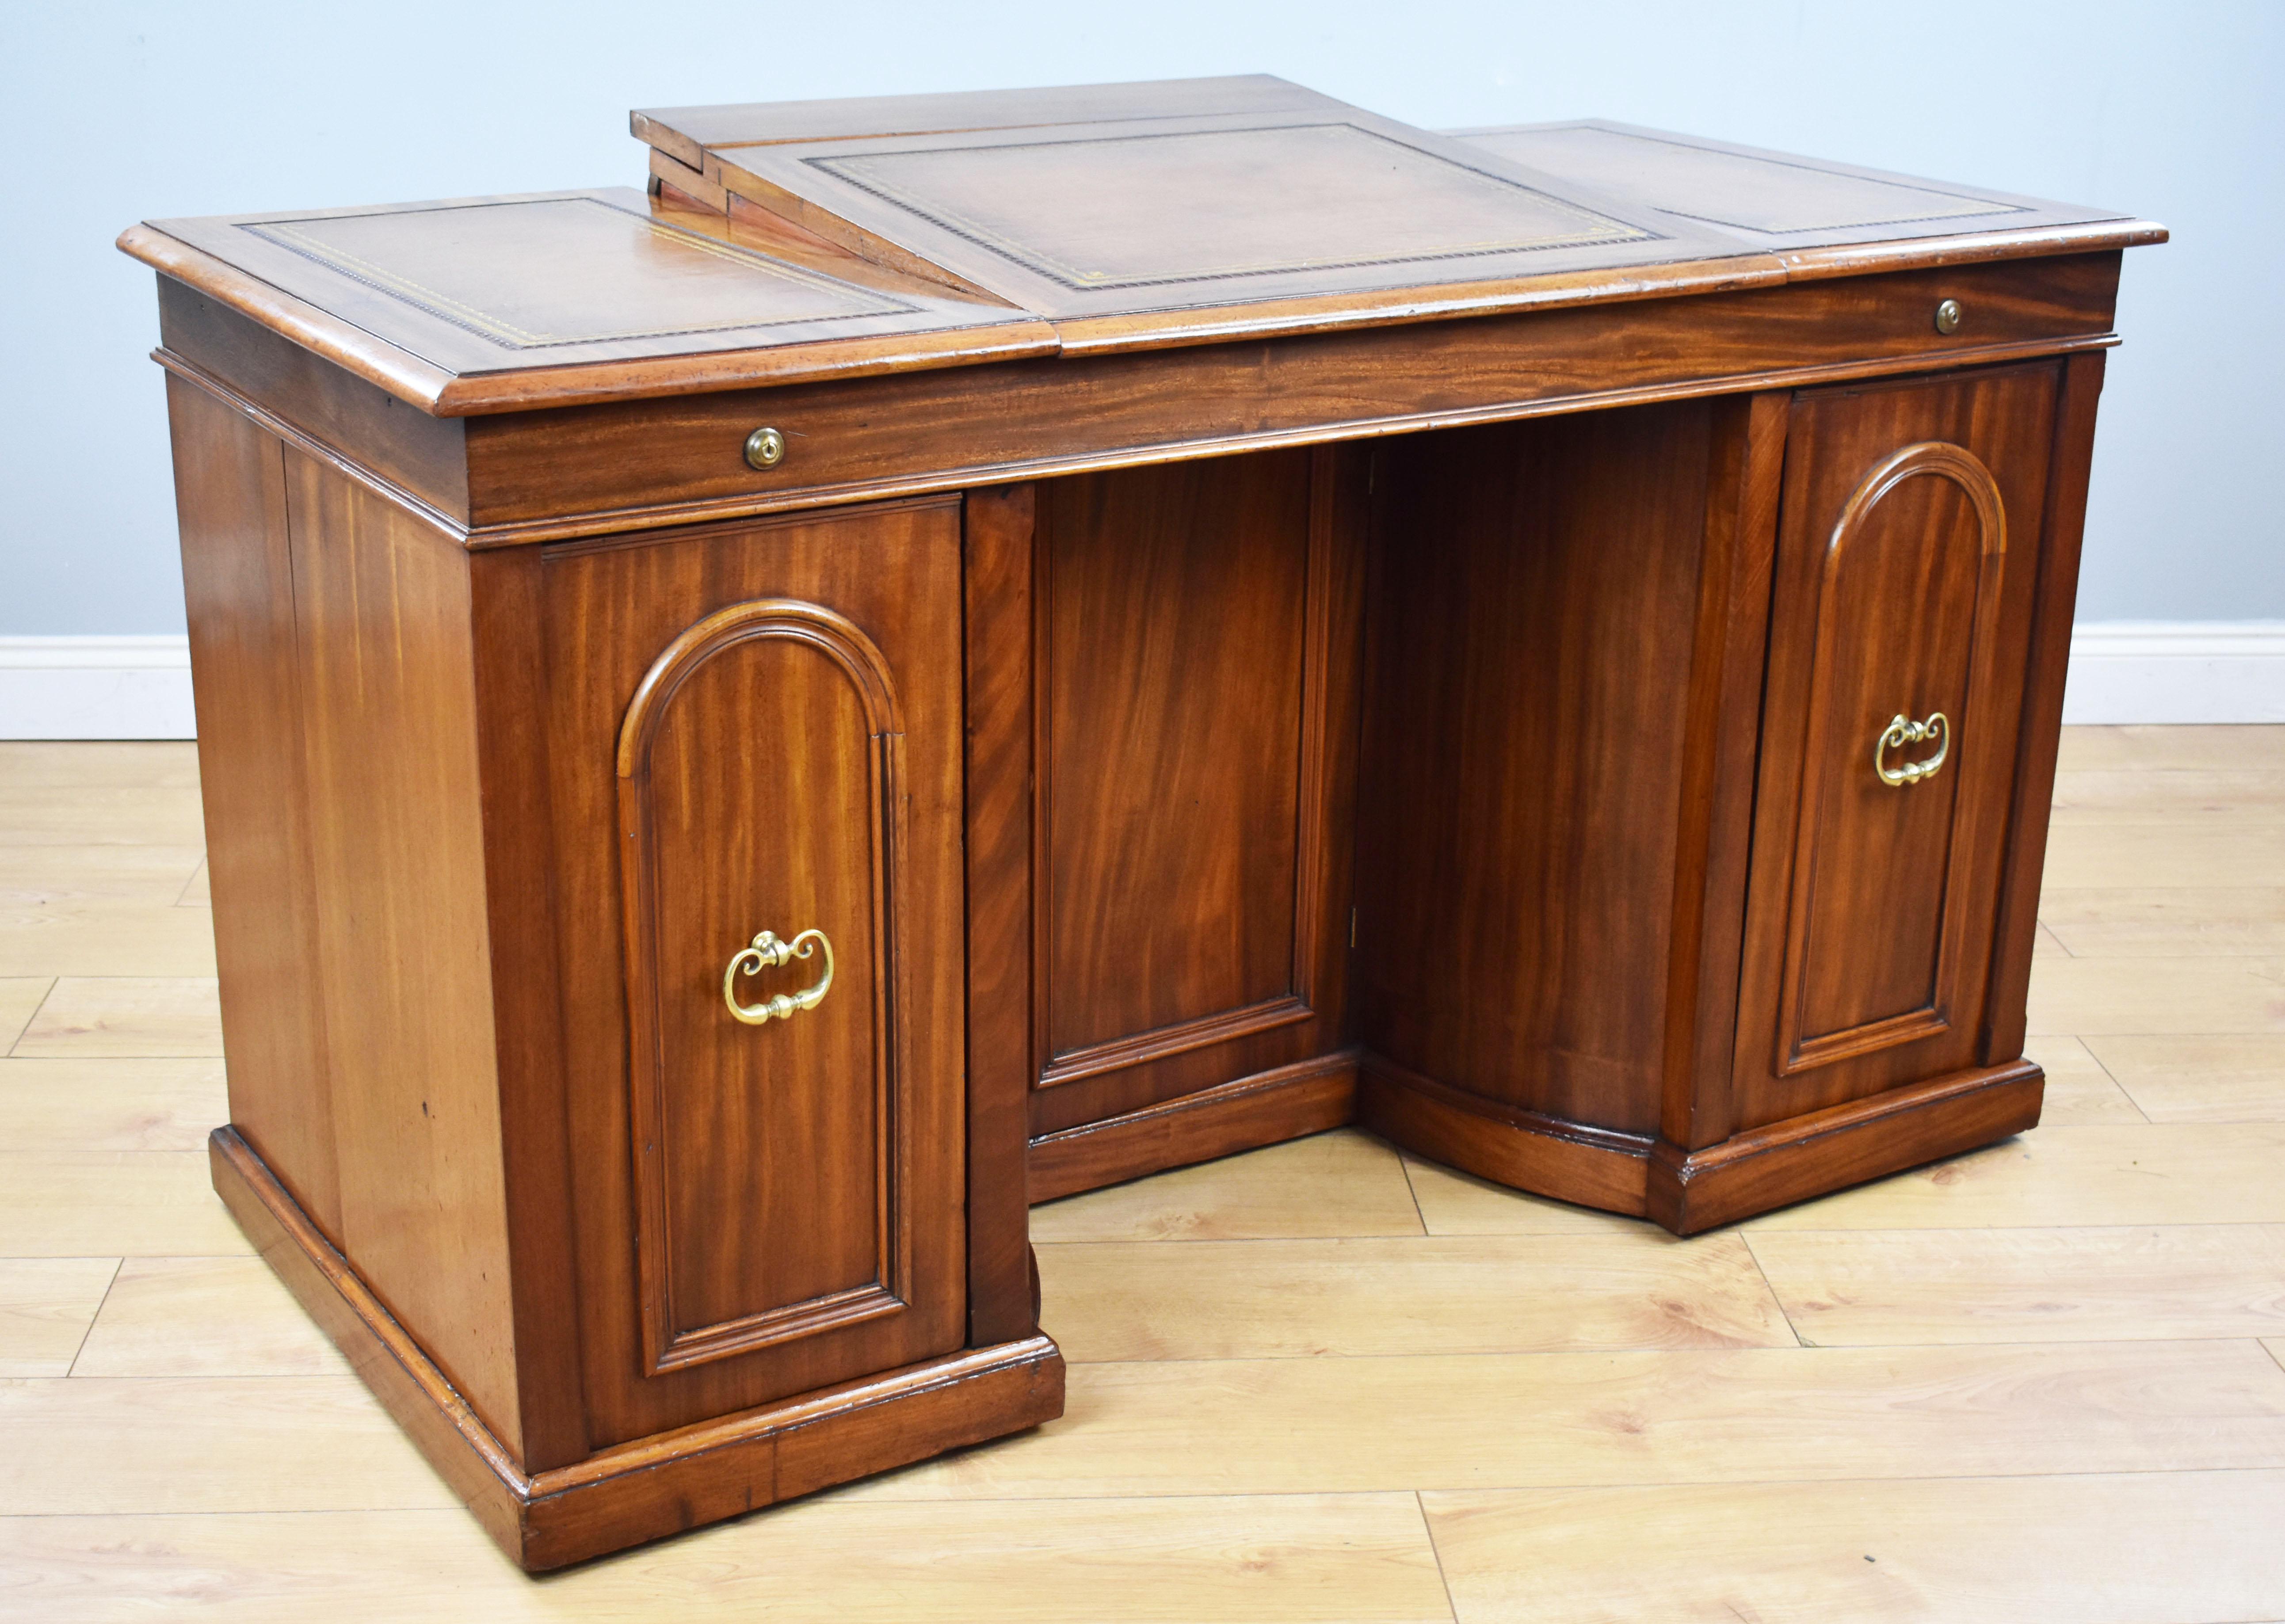 For sale is a good quality, unusual, Victorian mahogany kneehole desk by Francis and James Smith, Glasgow. The top, having three leather writing surfaces, each decorated with gold and blind tooling. Below this, there are two arched panels, each